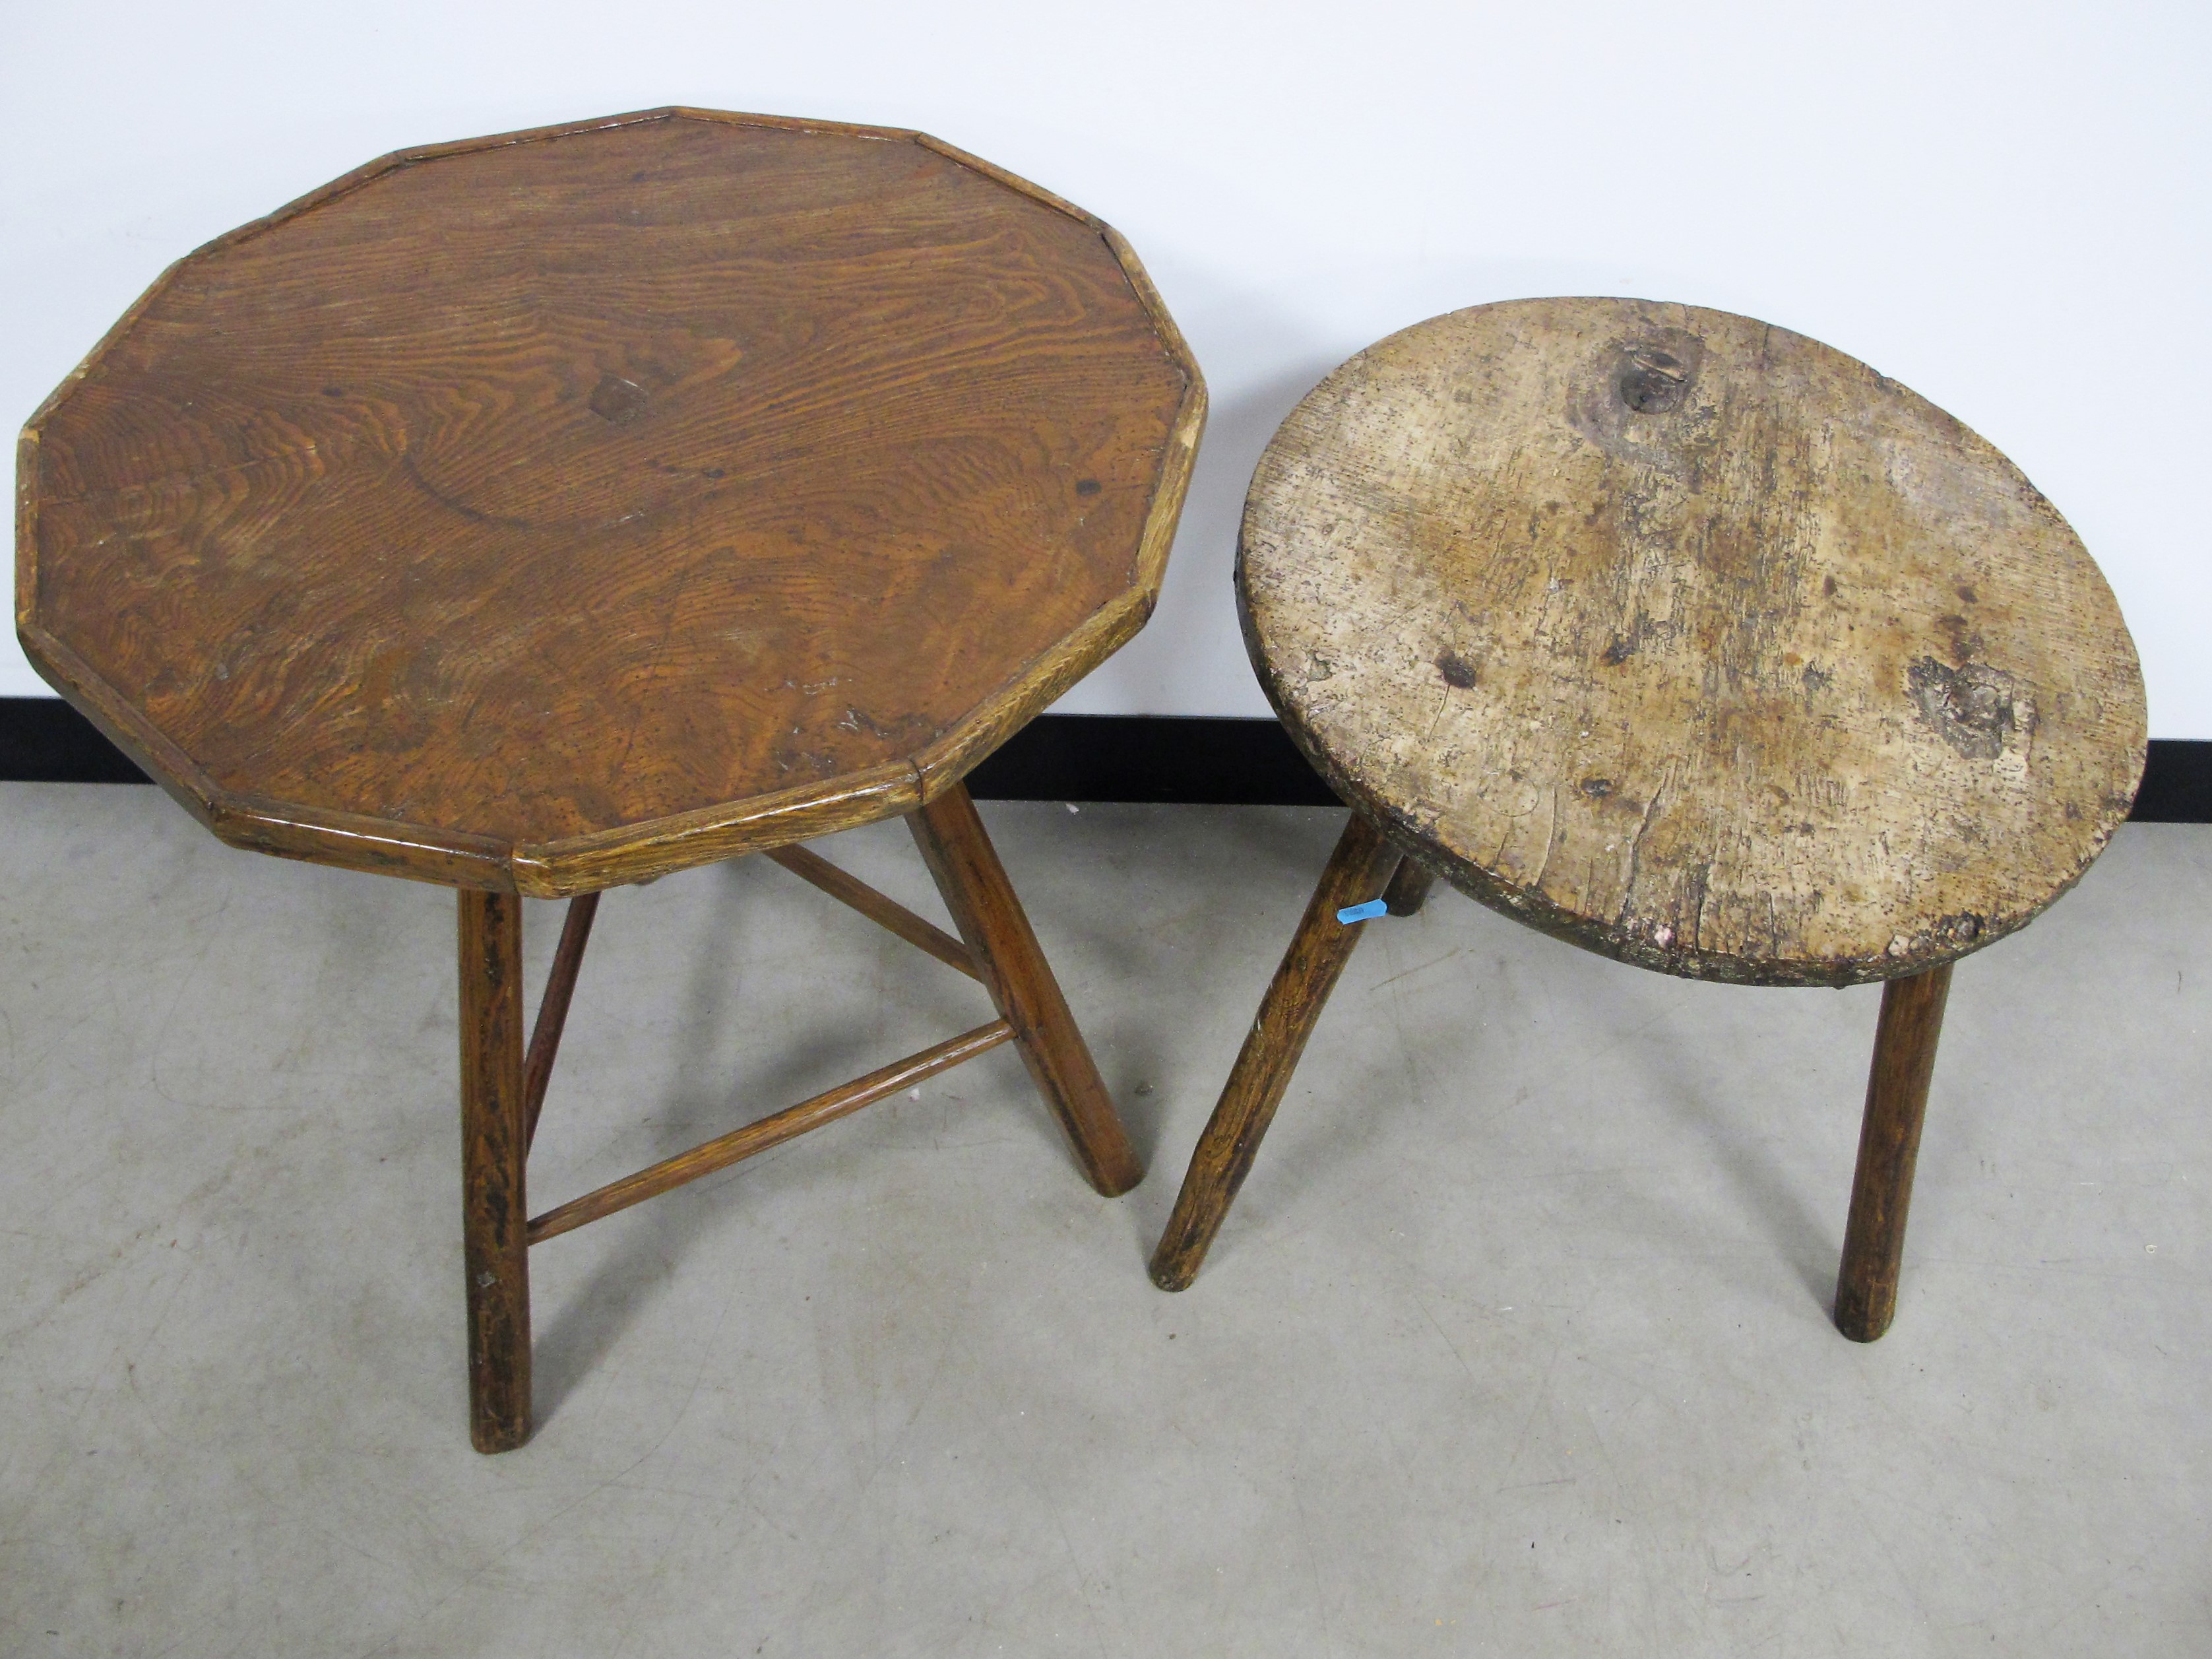 Two antique Cricket tables, one with a octagonal elm top the other from a fruitwood, 52cm x 66cm and